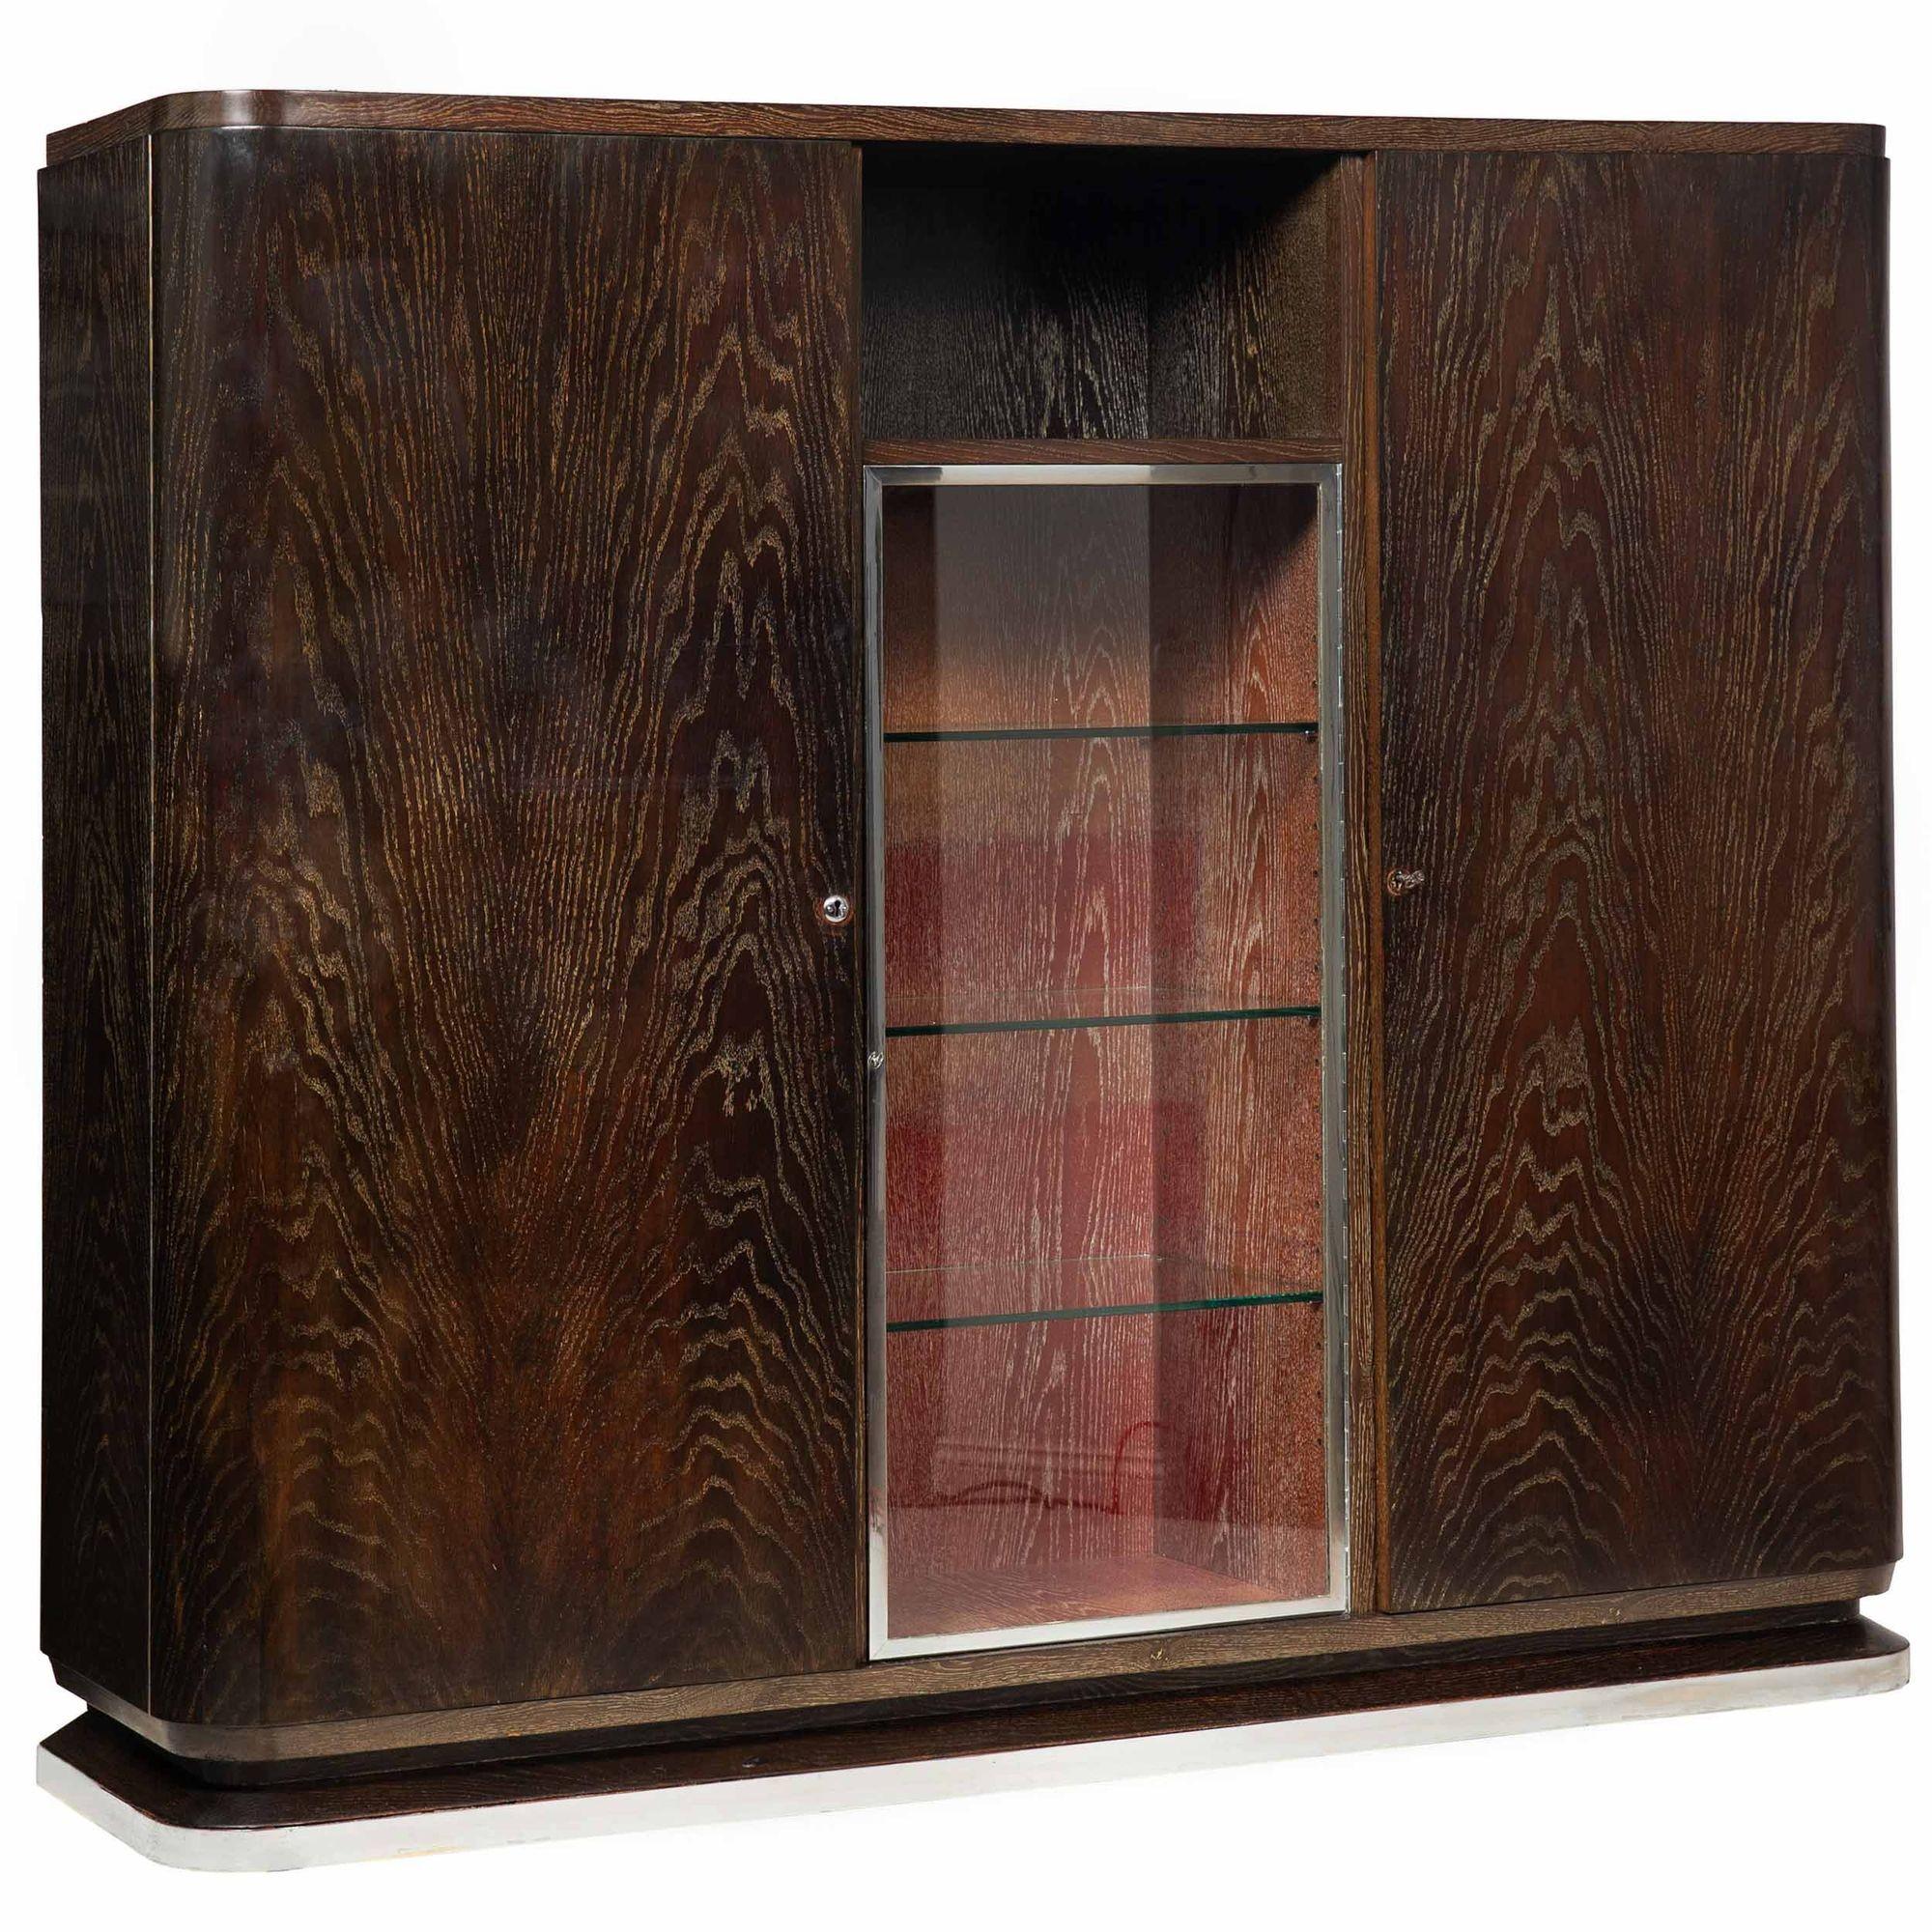 ART DECO CERUSED AND EBONIZED OAK DISPLAY CABINET WITH FLANKING BLIND BOOKSHELVES
Probably German, as the locks are of German origin  executed circa 1940  with chromed steel accents throughout
Item # 401QGP02S

A fabulous Art Deco era display